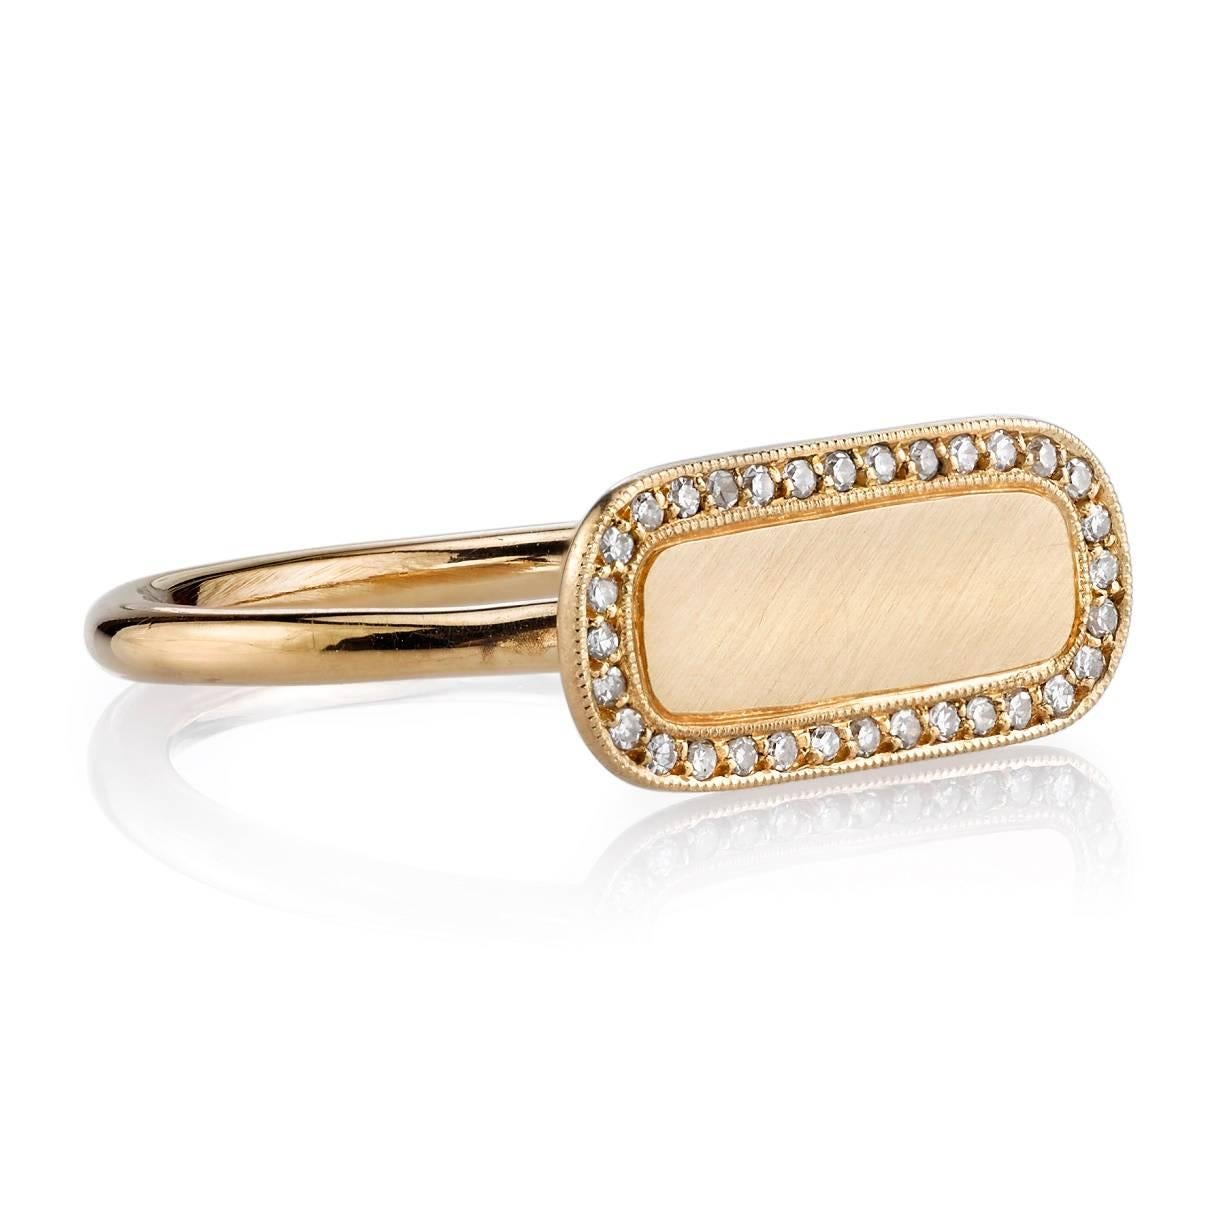 Vintage inspired yellow gold signet ring with 0.10ctw old European cut diamond frame. A modern take on the classic signet ring. Make it personal! Milo ring includes engraving of up to three letter, please call to specify.

Our jewelry is made